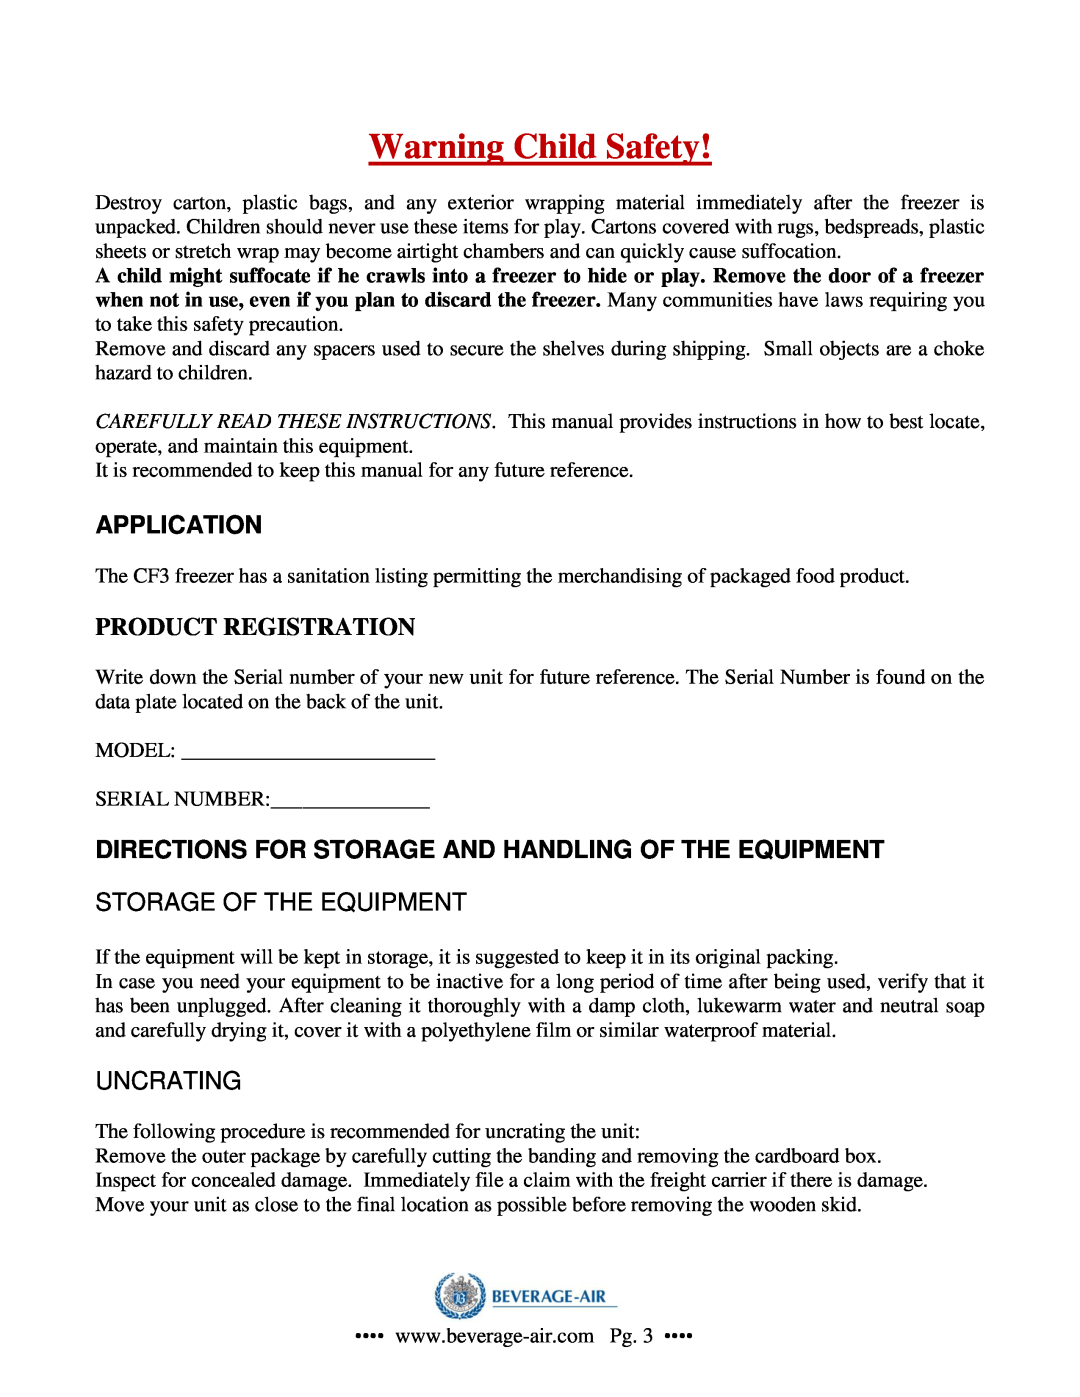 Beverage-Air CF-3 operation manual Application, Product Registration, Warning Child Safety 